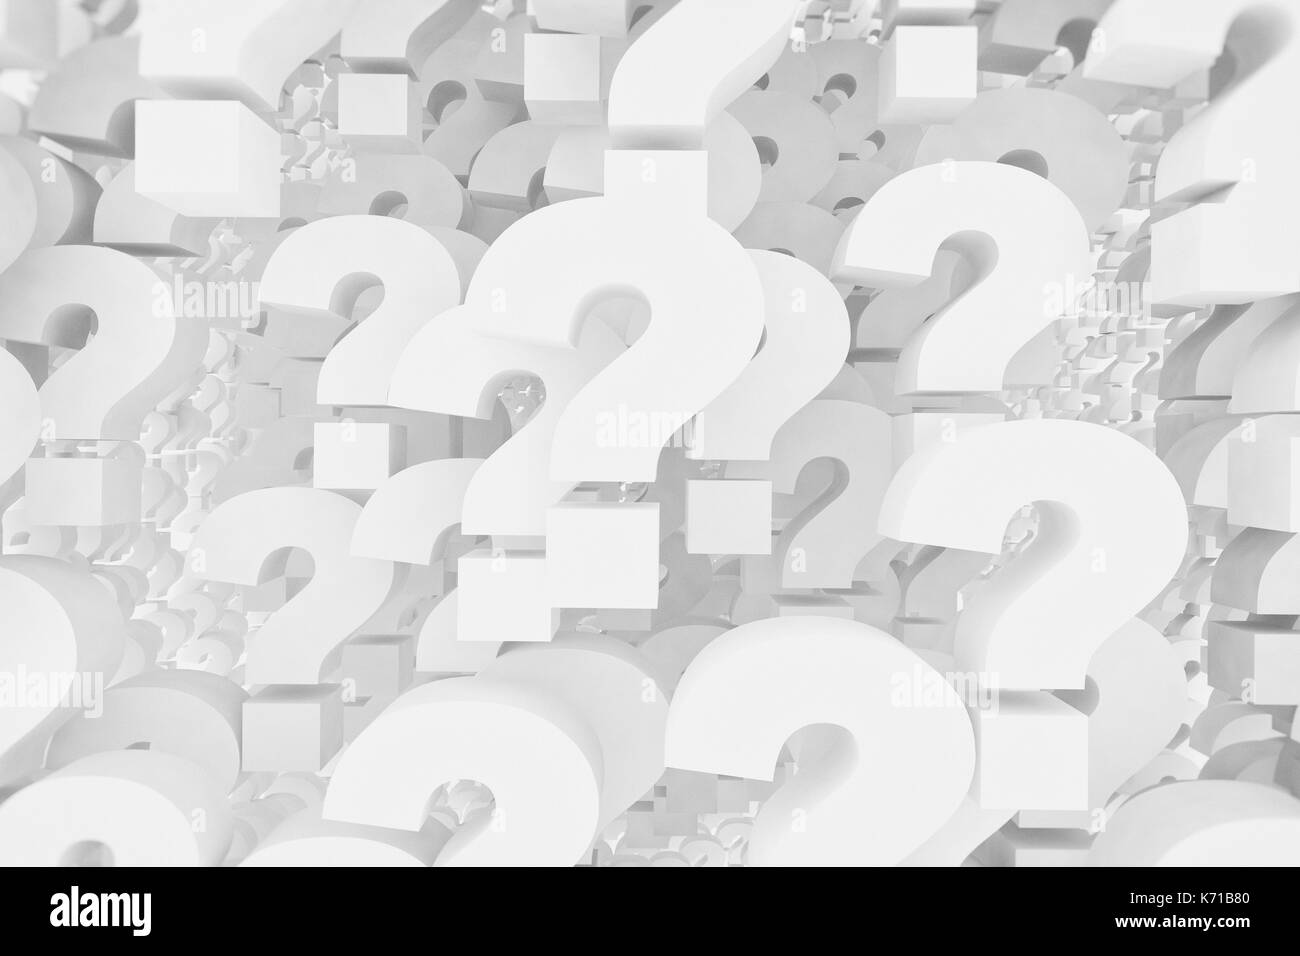 White question marks 3d symbols background Stock Photo